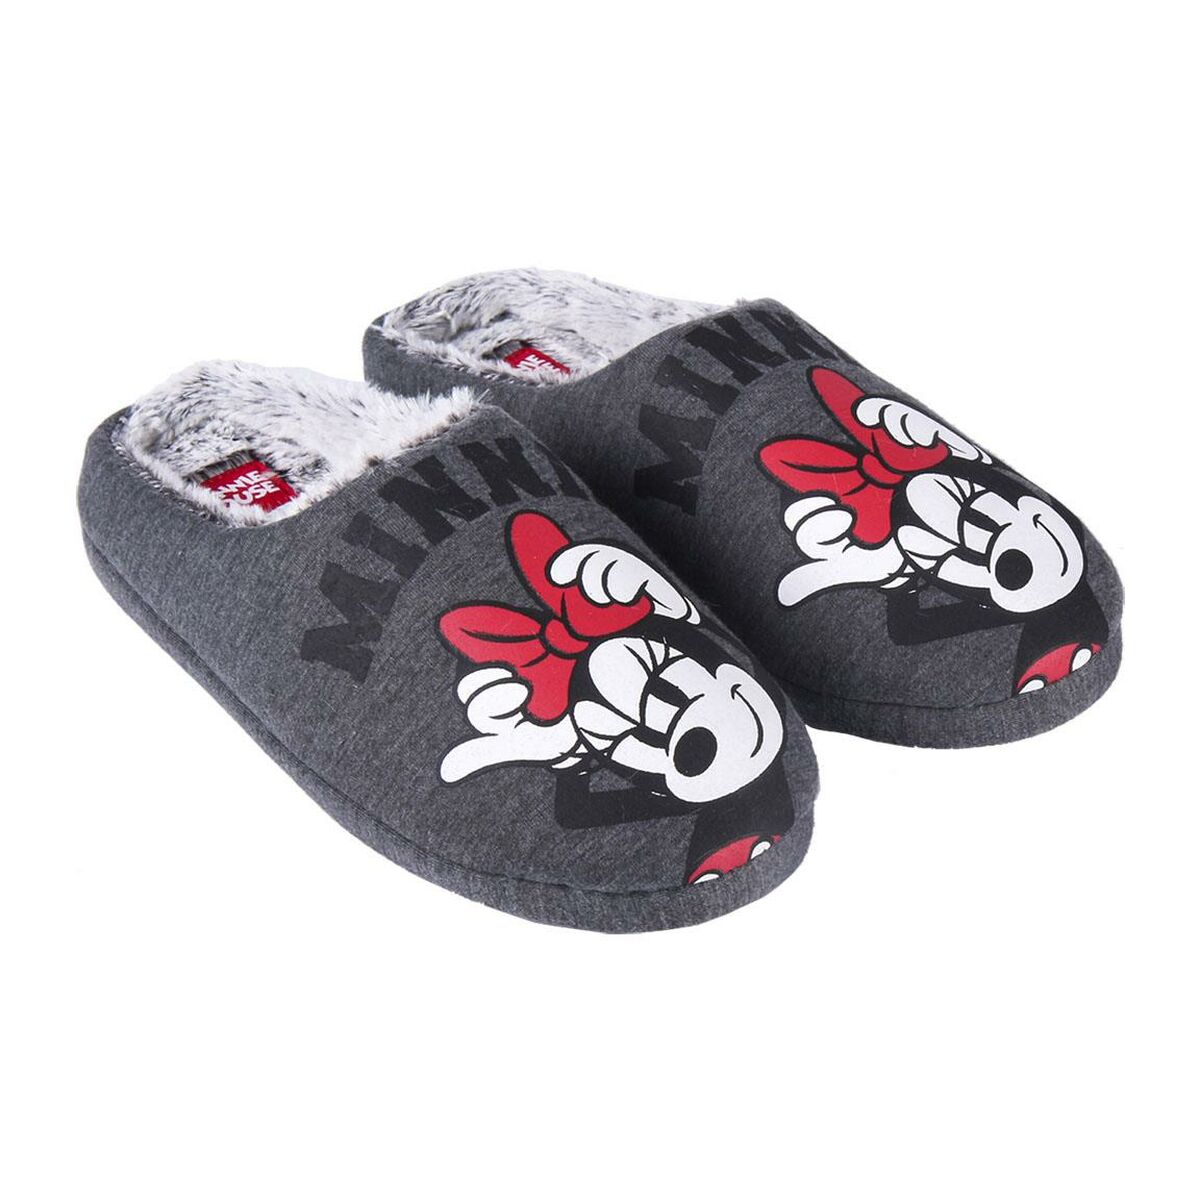 House Slippers Minnie Mouse Grey